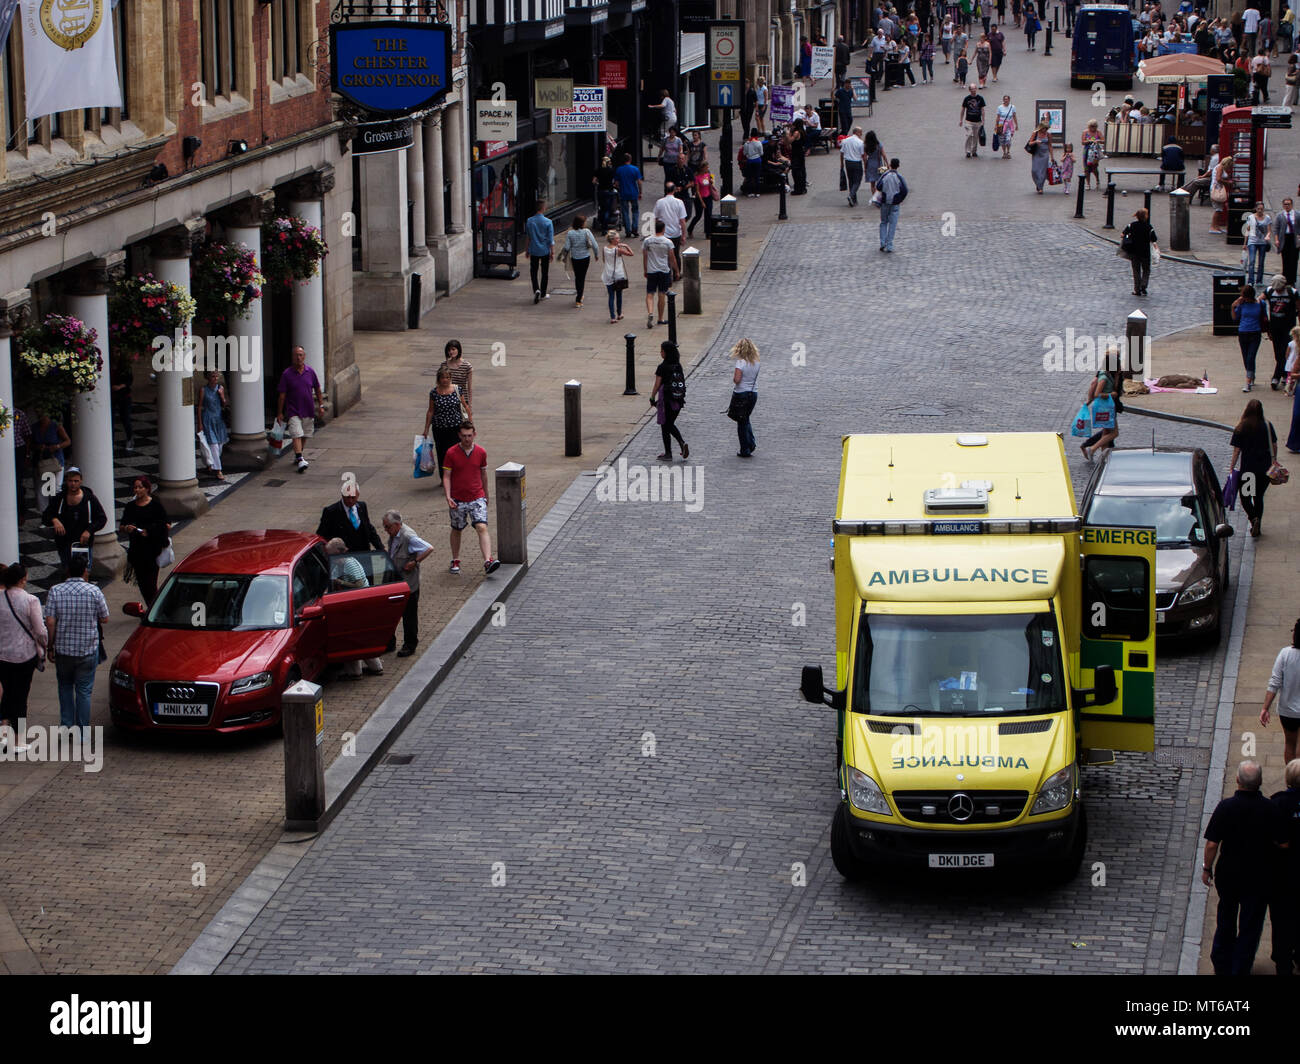 Ambulance in Eastgate street seen from the Eastgate clock in Chester, England, UK. Stock Photo